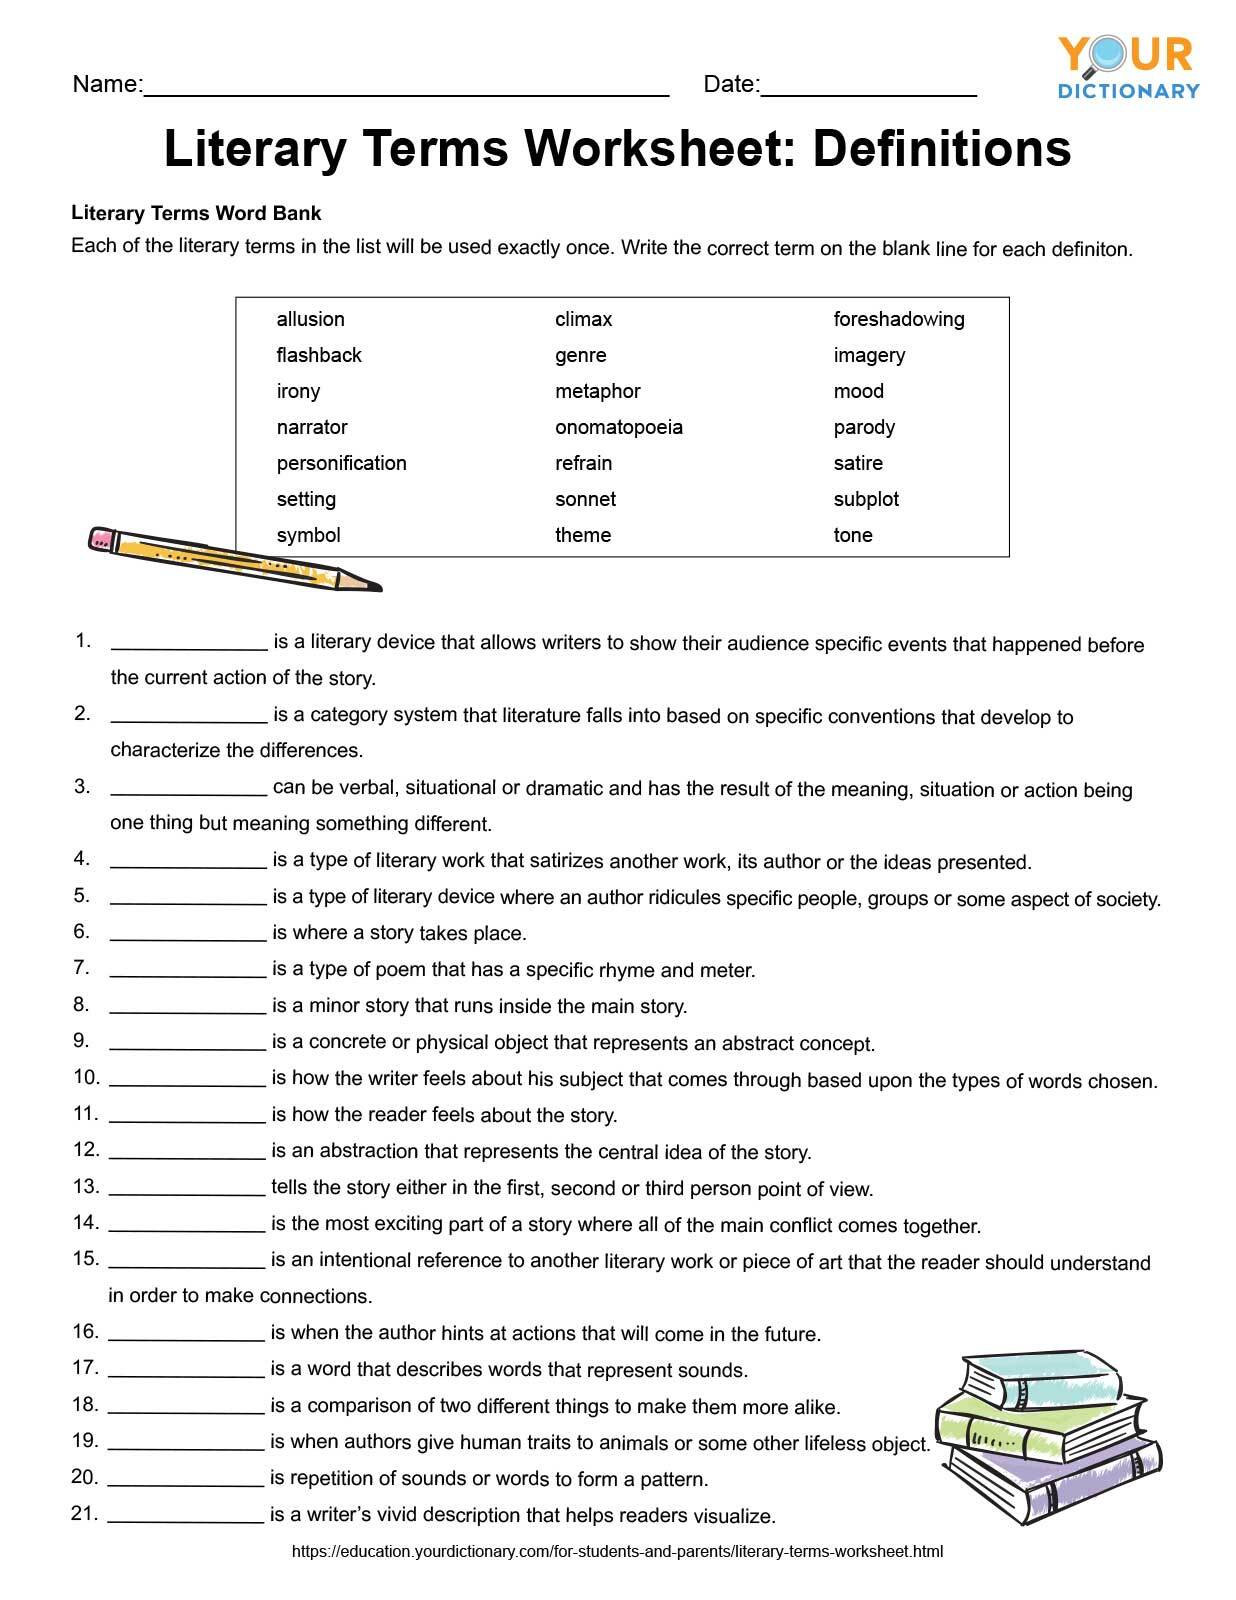 Literary Terms Worksheet With Answers